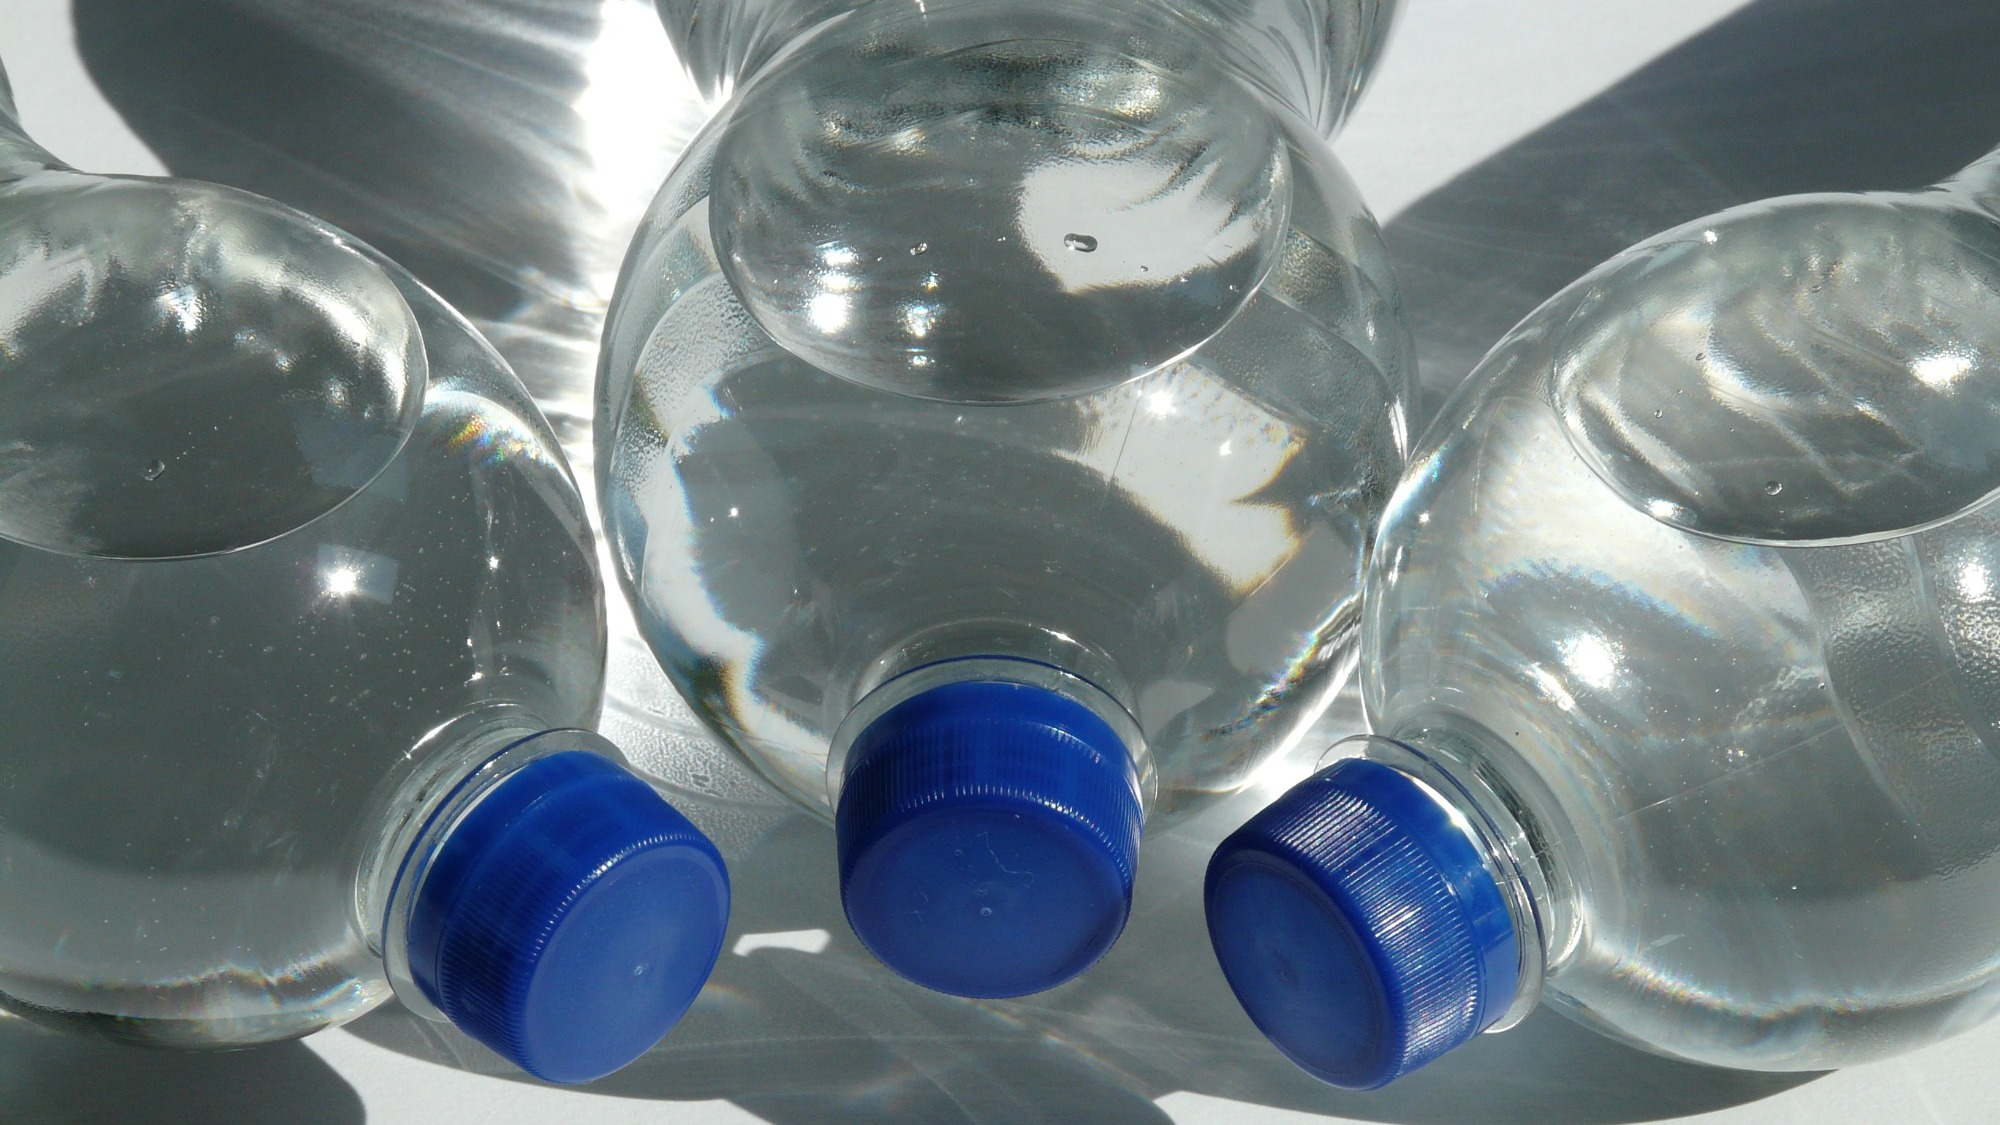 Plastic bottles hinder universal clean water access